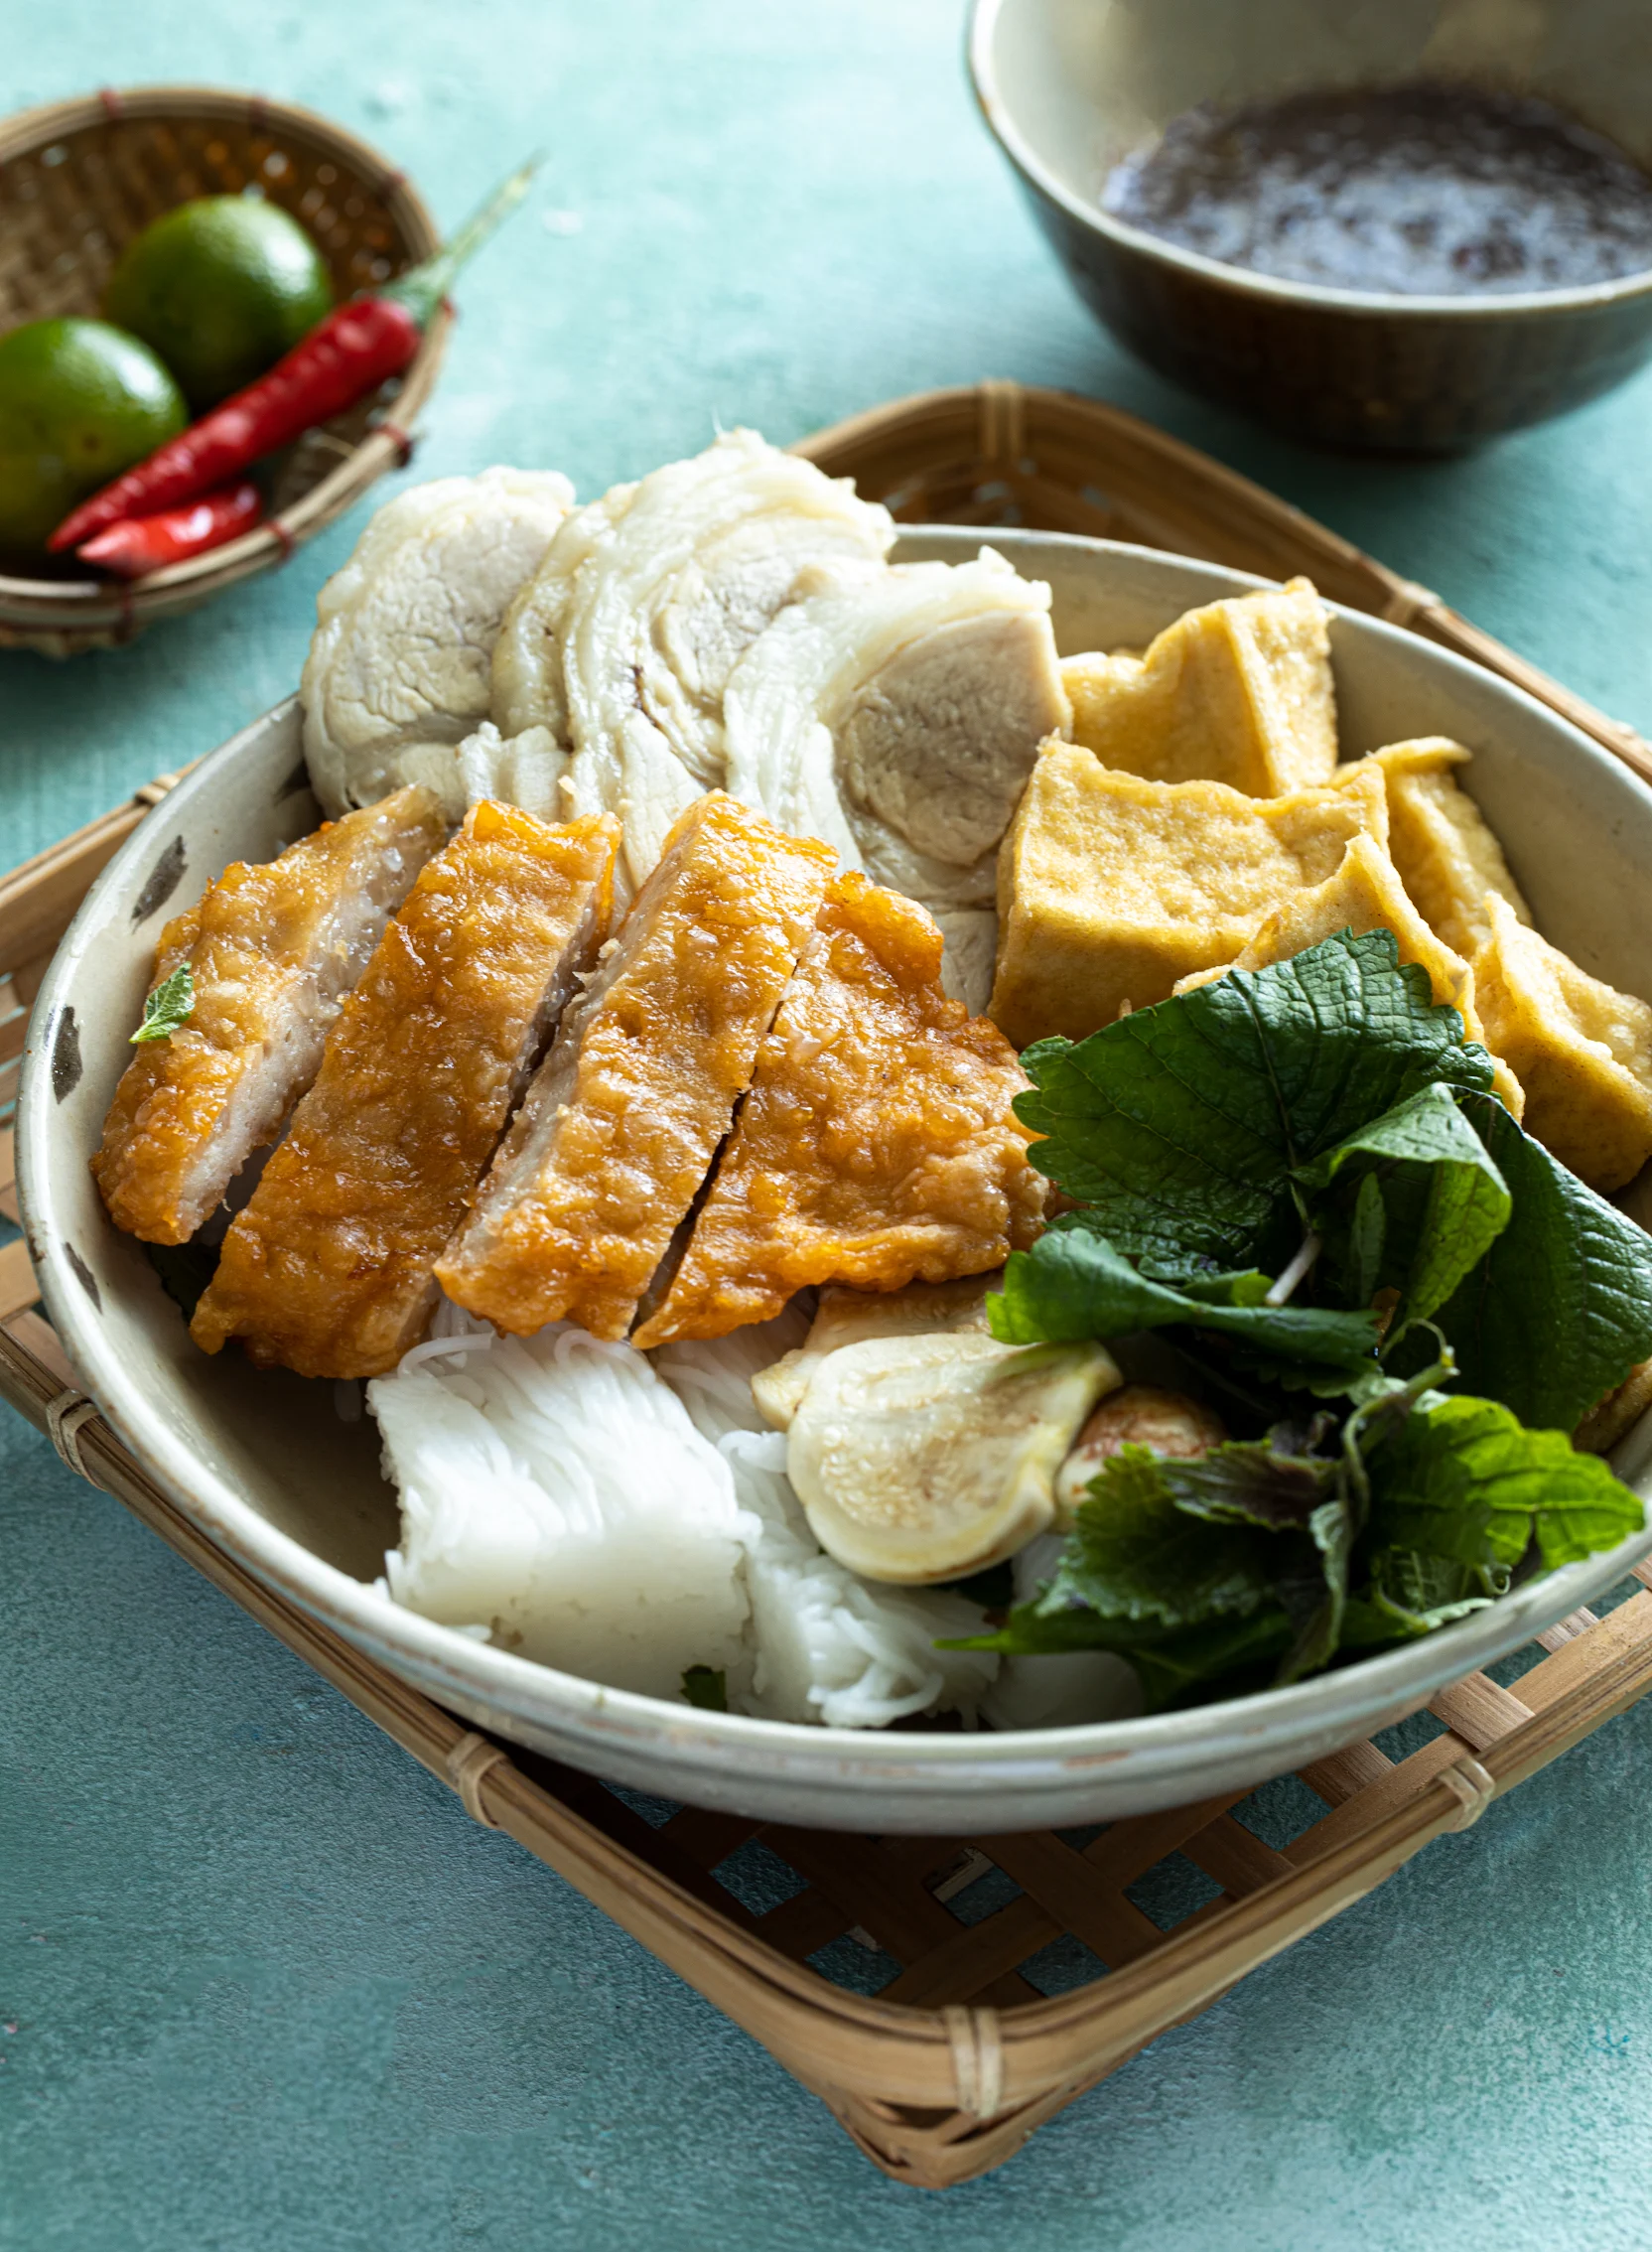 Vietnamese dish Bun Dao mam tom with chicken in a bowl on living well in Vietnam for less